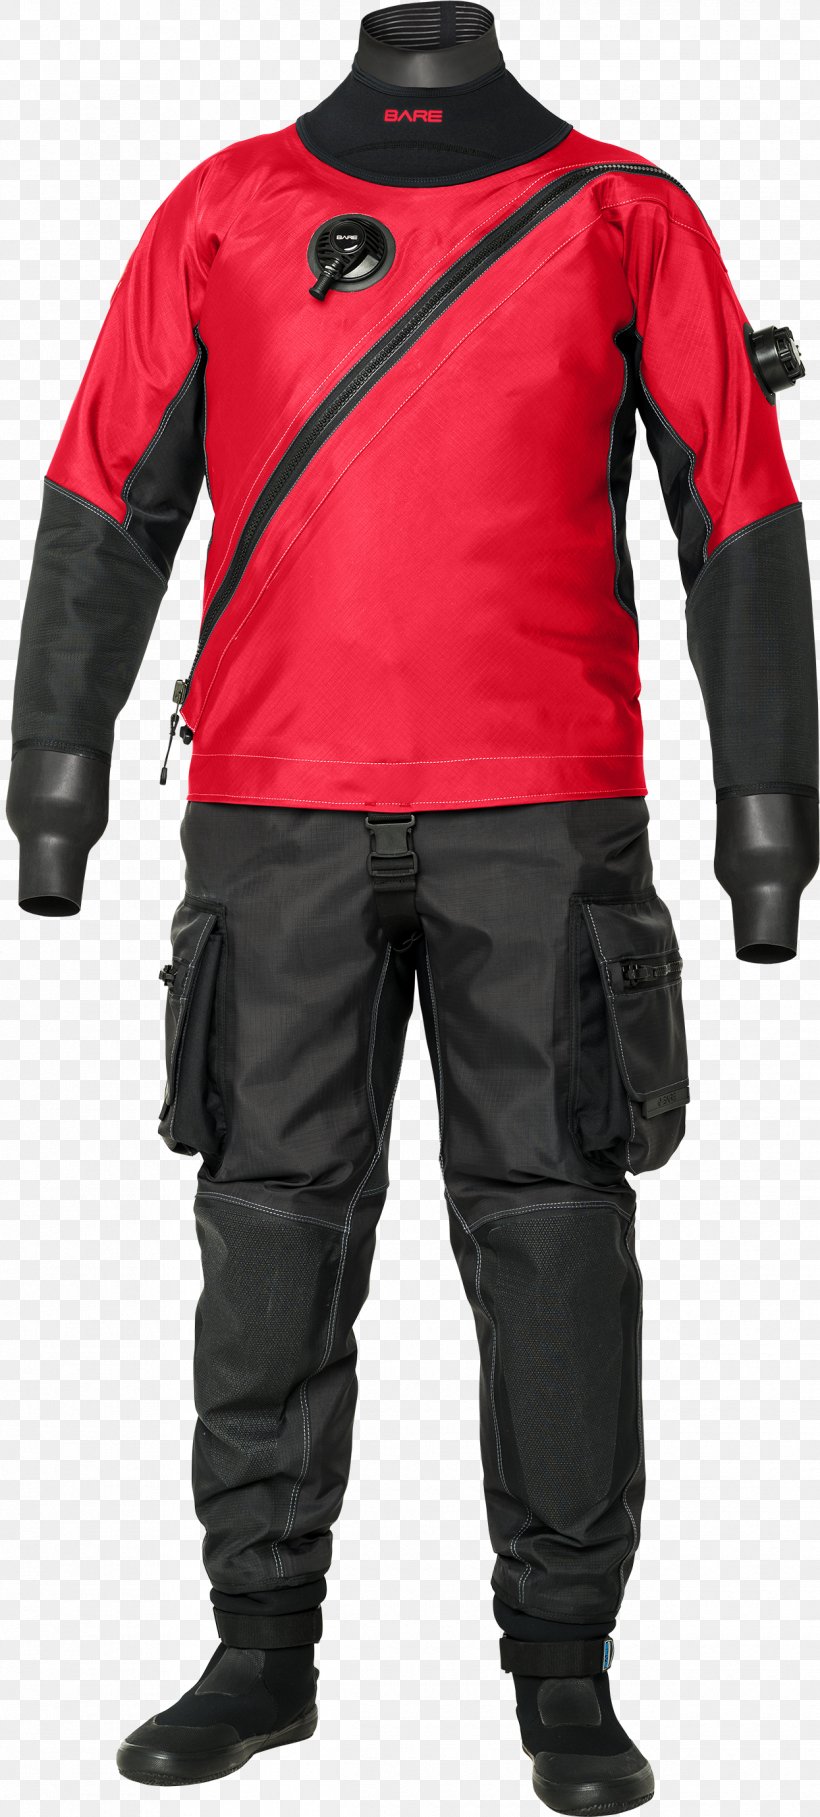 Dry Suit Technical Diving Diving Equipment Scuba Diving Underwater Diving, PNG, 1245x2760px, Dry Suit, Cave Diving, Cordura, Diving Equipment, Diving Instructor Download Free